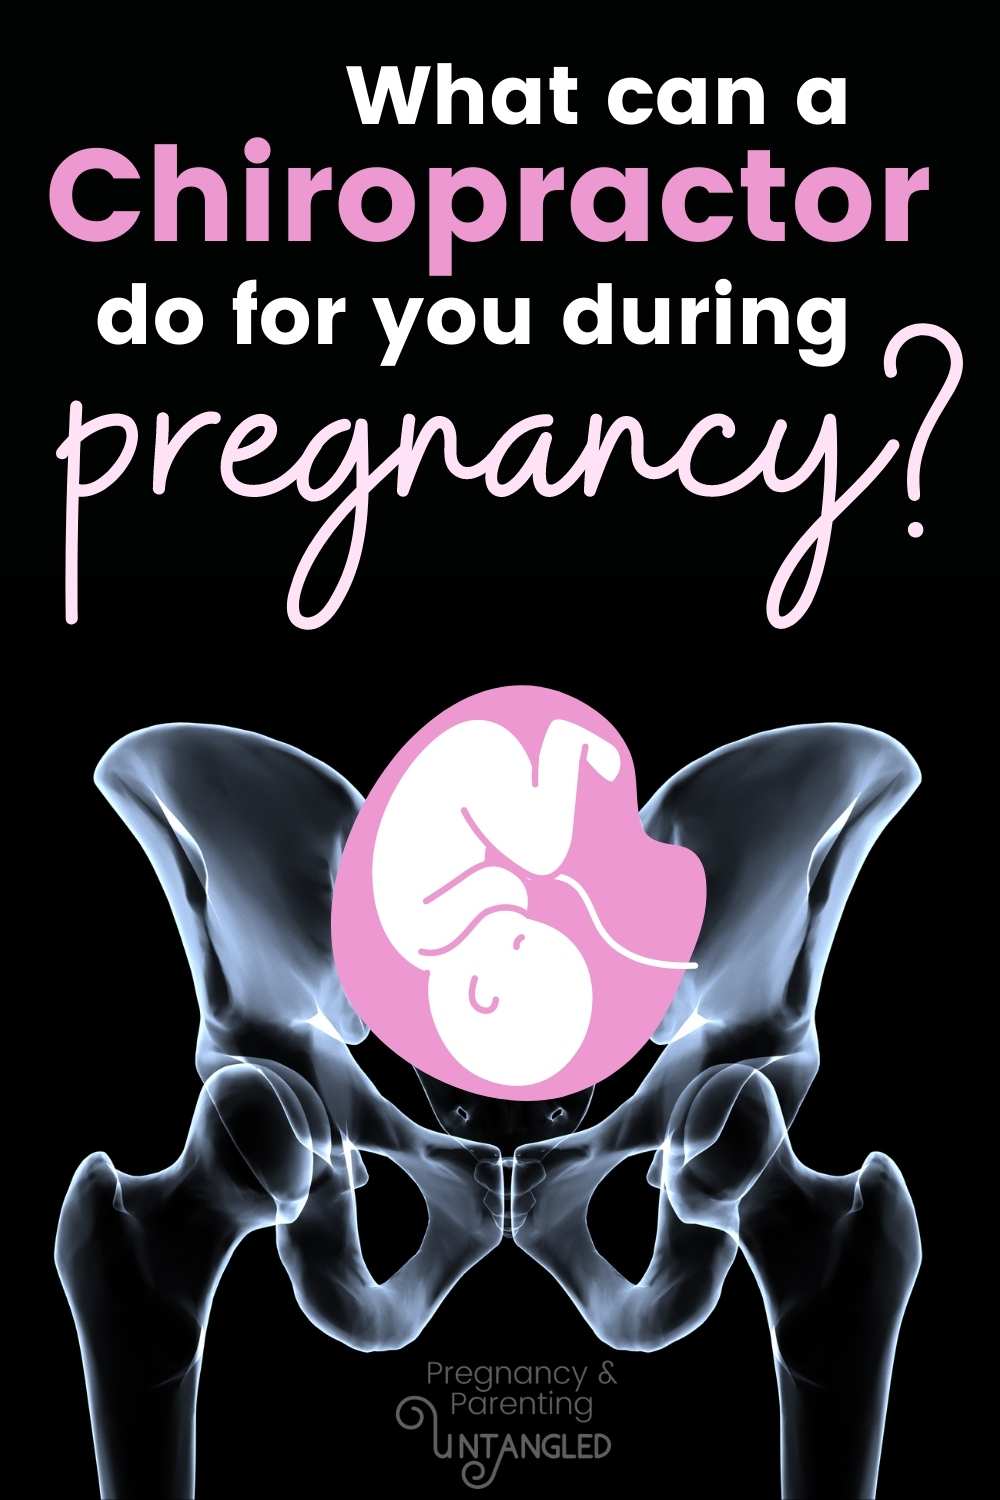 Today we're talking to a chiropractor about what types of things they can help you with during pregnancy. I was always a bit hesitant to recommend chiropractic care, but the longer I have done labor and delivery the more I realize how helpful they could be! via @pullingcurls